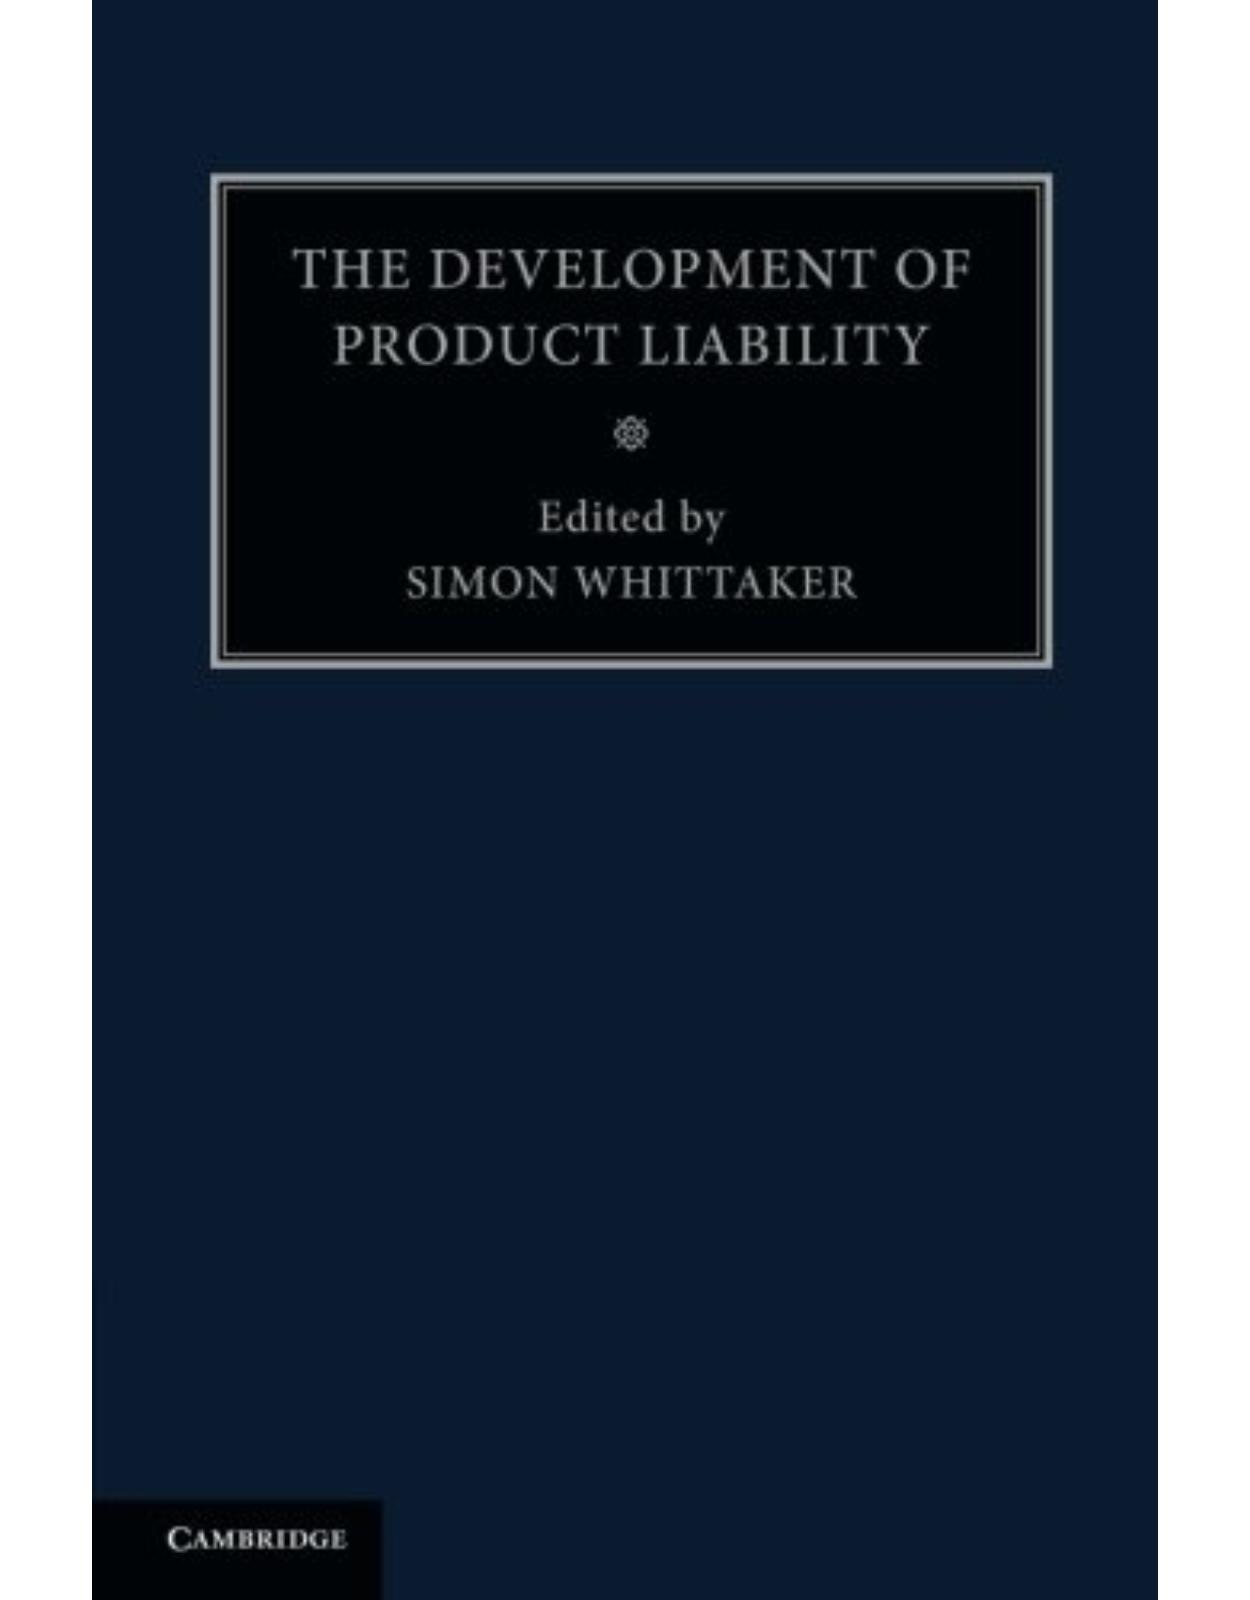 The Development of Product Liability